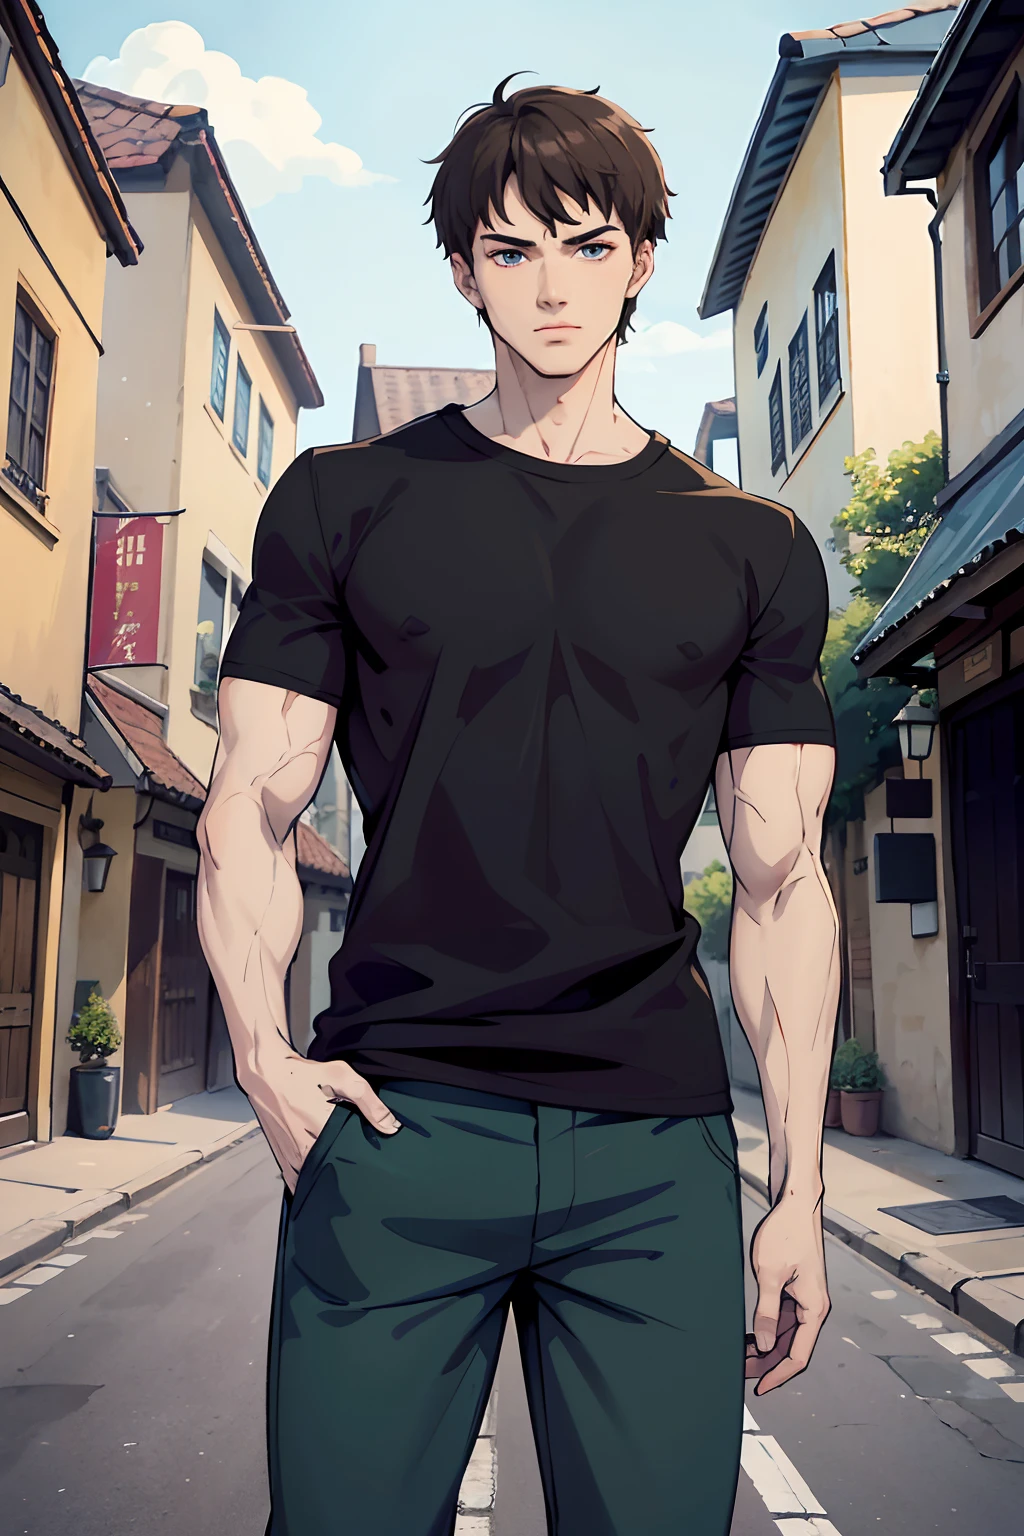 normal clothes, T-shirt, black clothing color, young man, 20 years, light brown hair, short hair, blue eyes, muscular, strong, tall, 6.3 foot tall, confident pose, masterpiece, European village background, street background